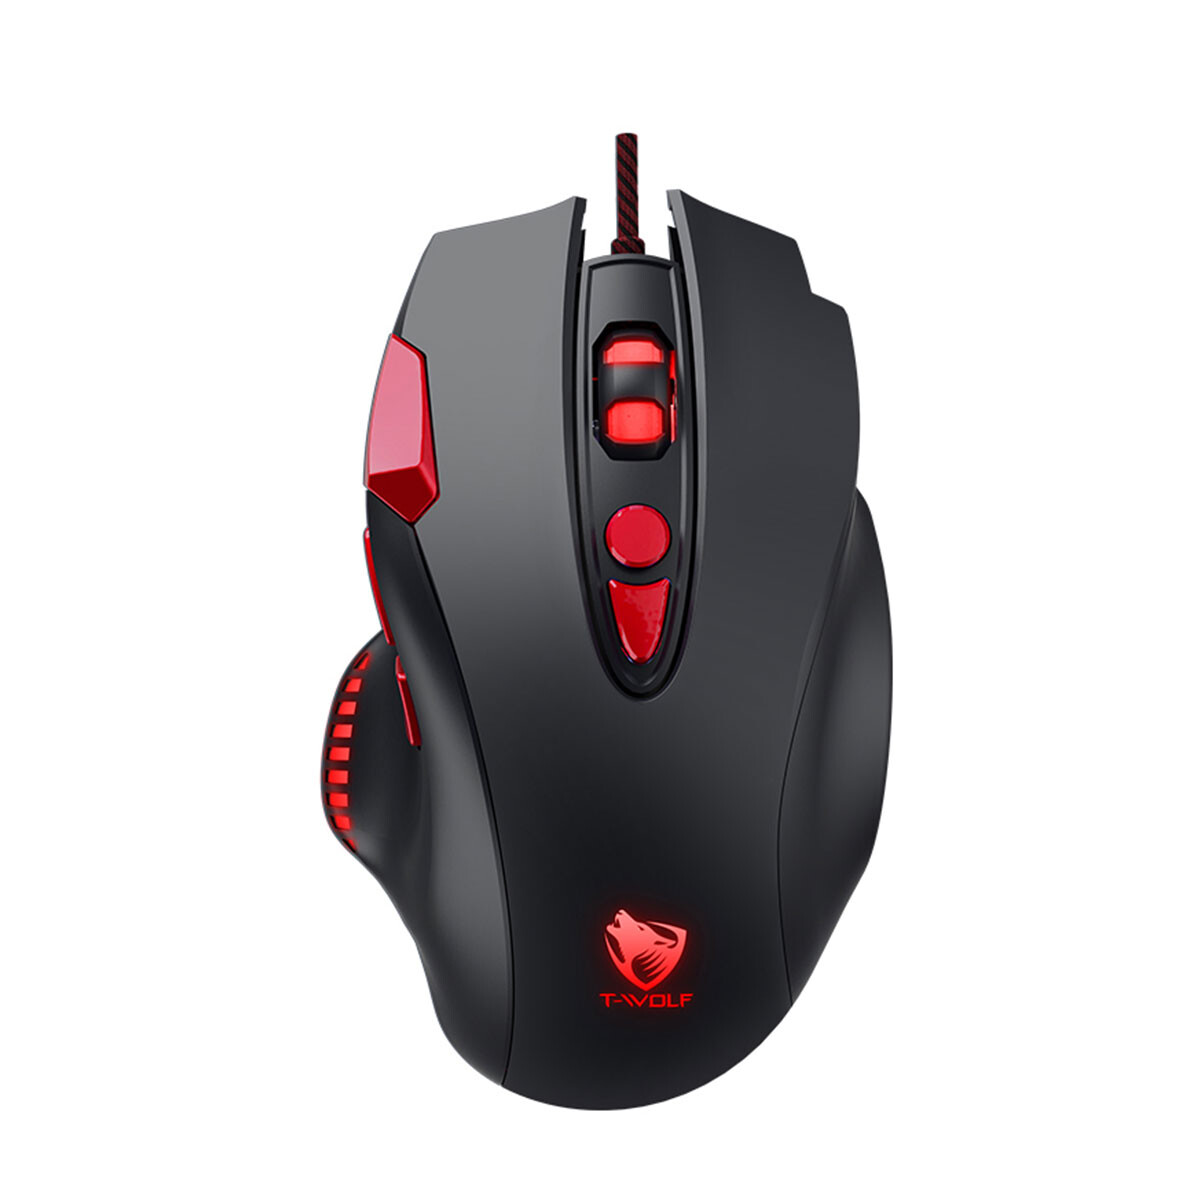 MOUSE GAMER CON CABLE TWOLF G550BASIC BASIC 